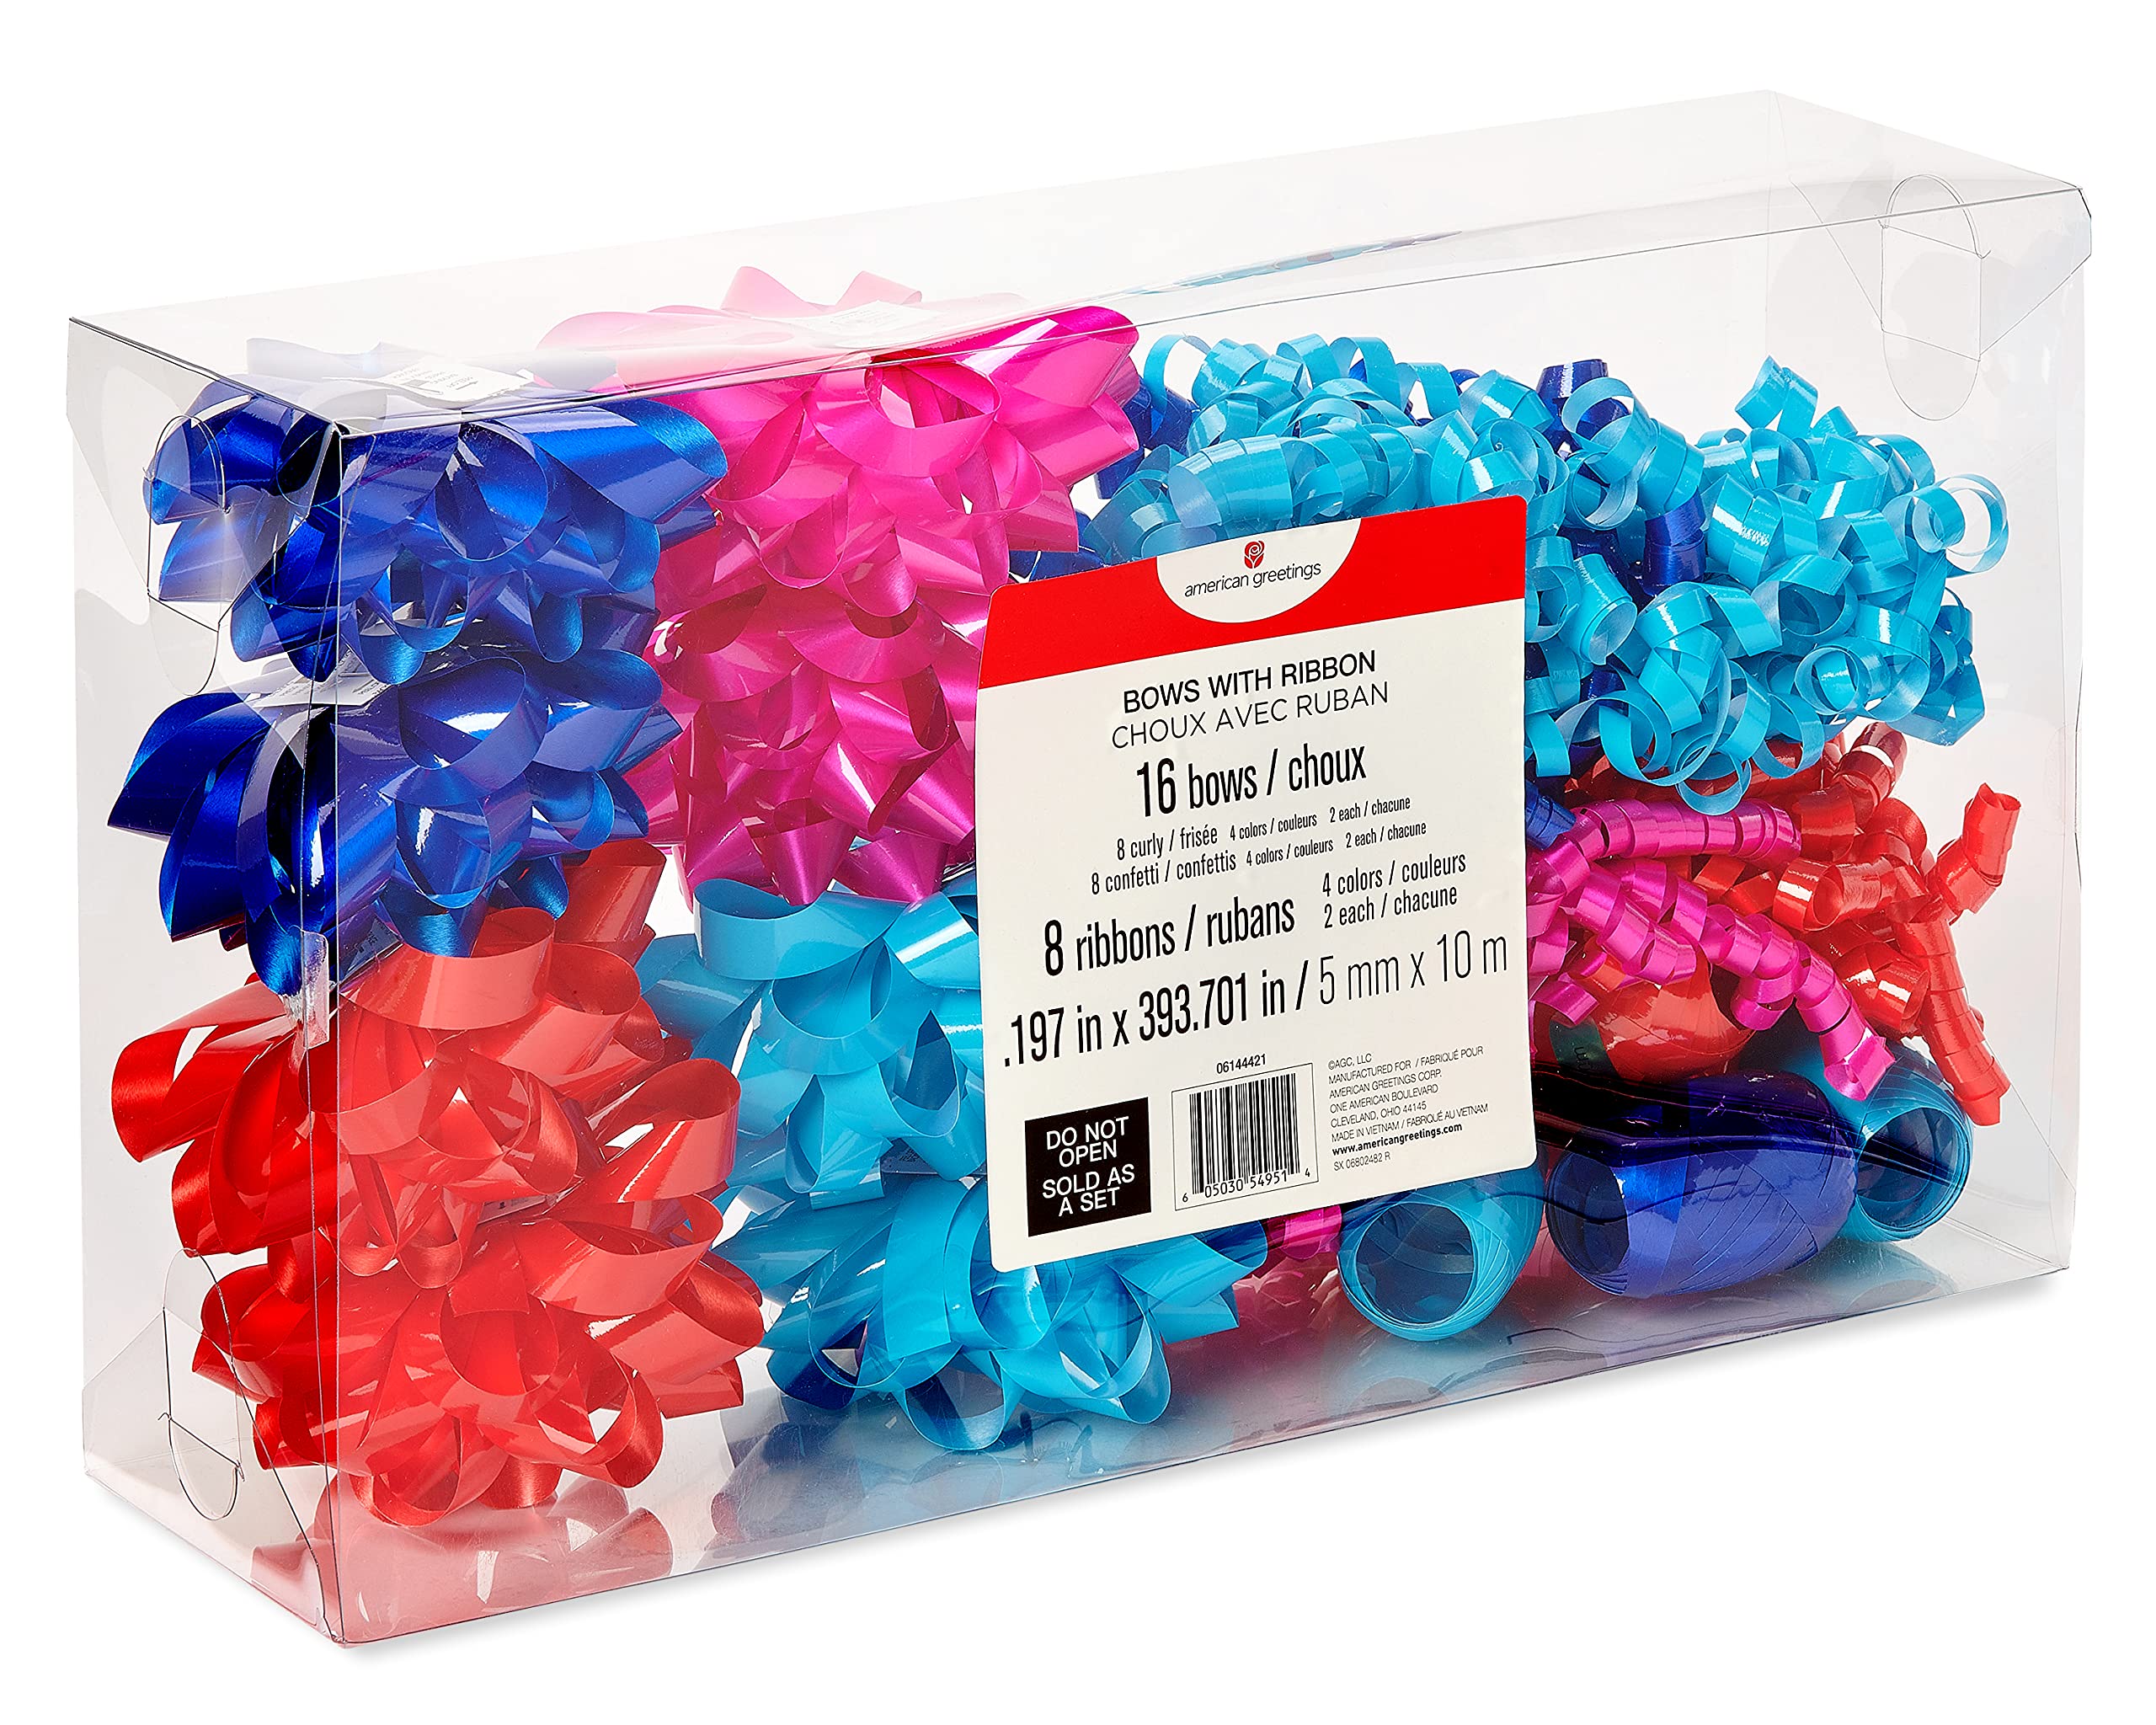 American Greetings Bows and Ribbon for Gift Wrapping (Turquoise, Fuchsia, Red and Royal Blue) for Christmas, Hannukah, Kwanzaa and All Holidays (24-Count)